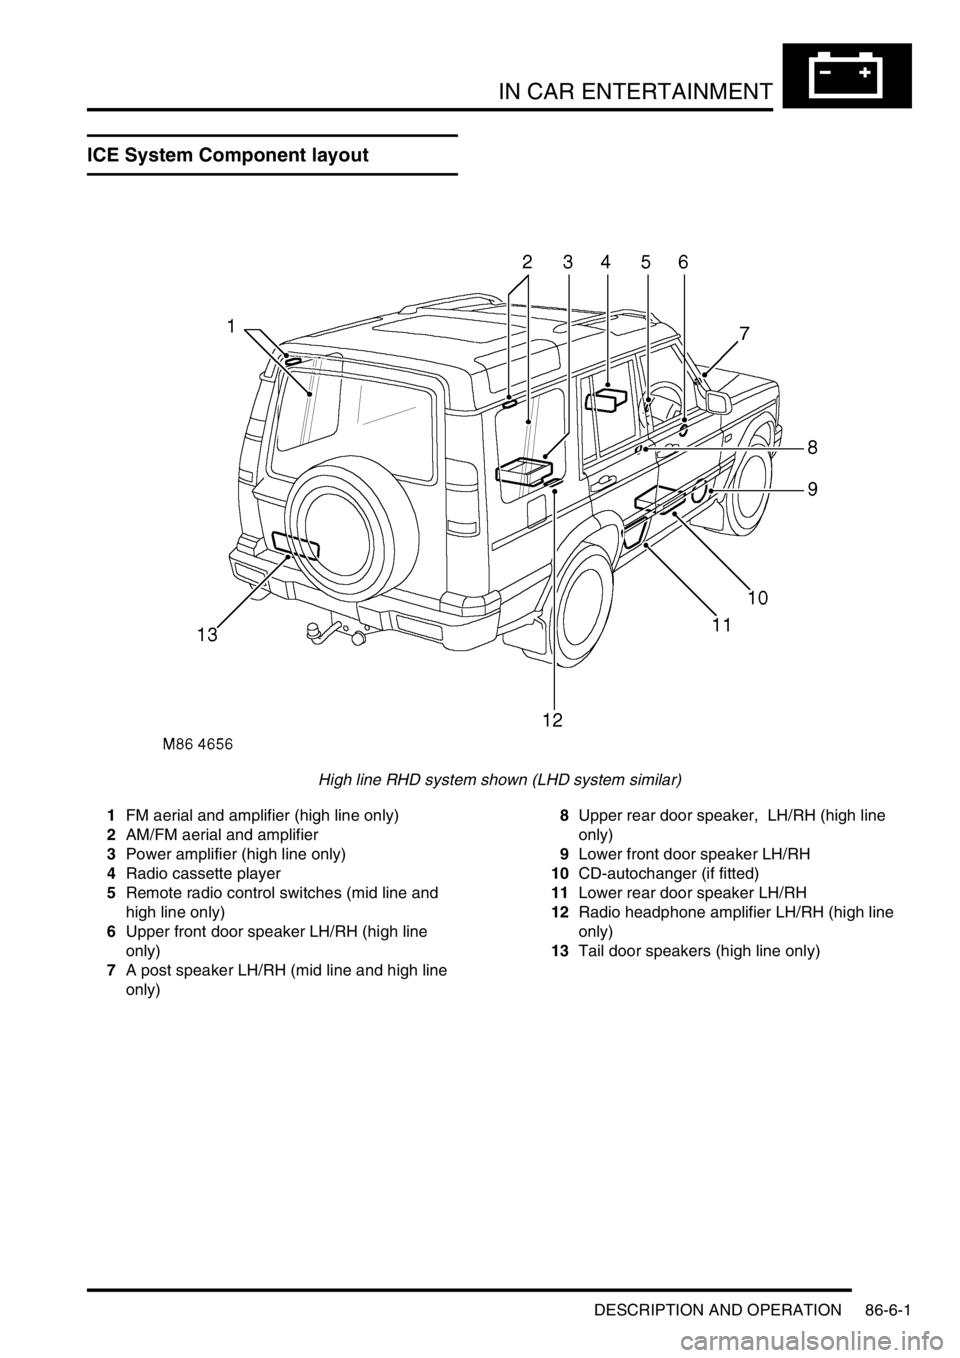 LAND ROVER DISCOVERY 2002  Workshop Manual IN CAR ENTERTAINMENT
DESCRIPTION AND OPERATION 86-6-1
IN CAR ENTERTA INMENT DESCRIPTION AND  OPERAT ION
ICE System Component layout
High line RHD system shown (LHD system similar)
1FM aerial and ampli